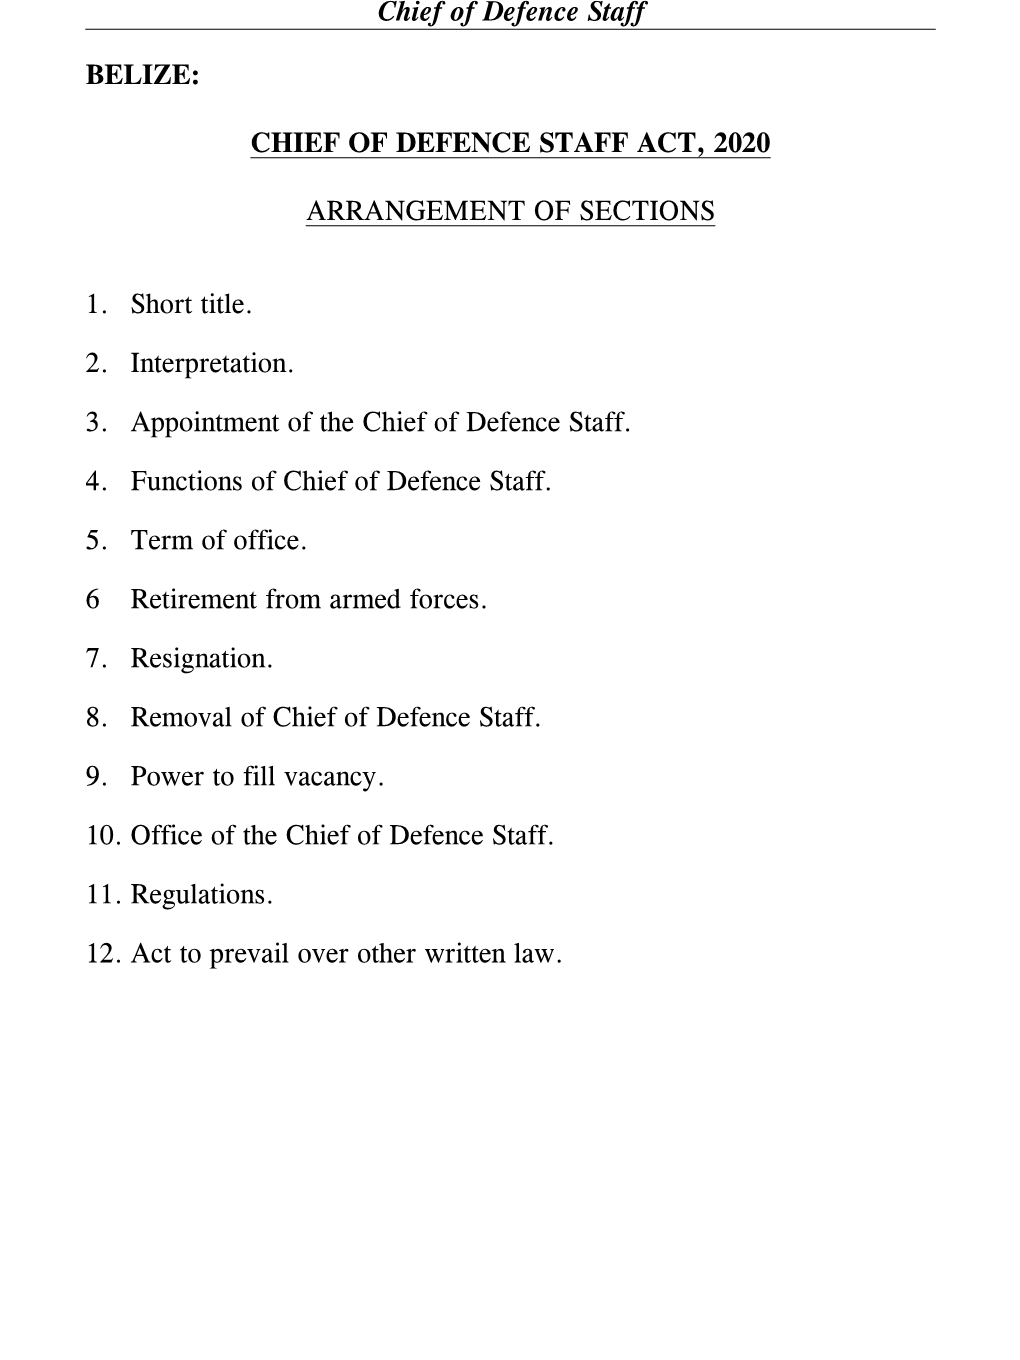 Act No. 3 of 2020 – Chief of Defence Staff